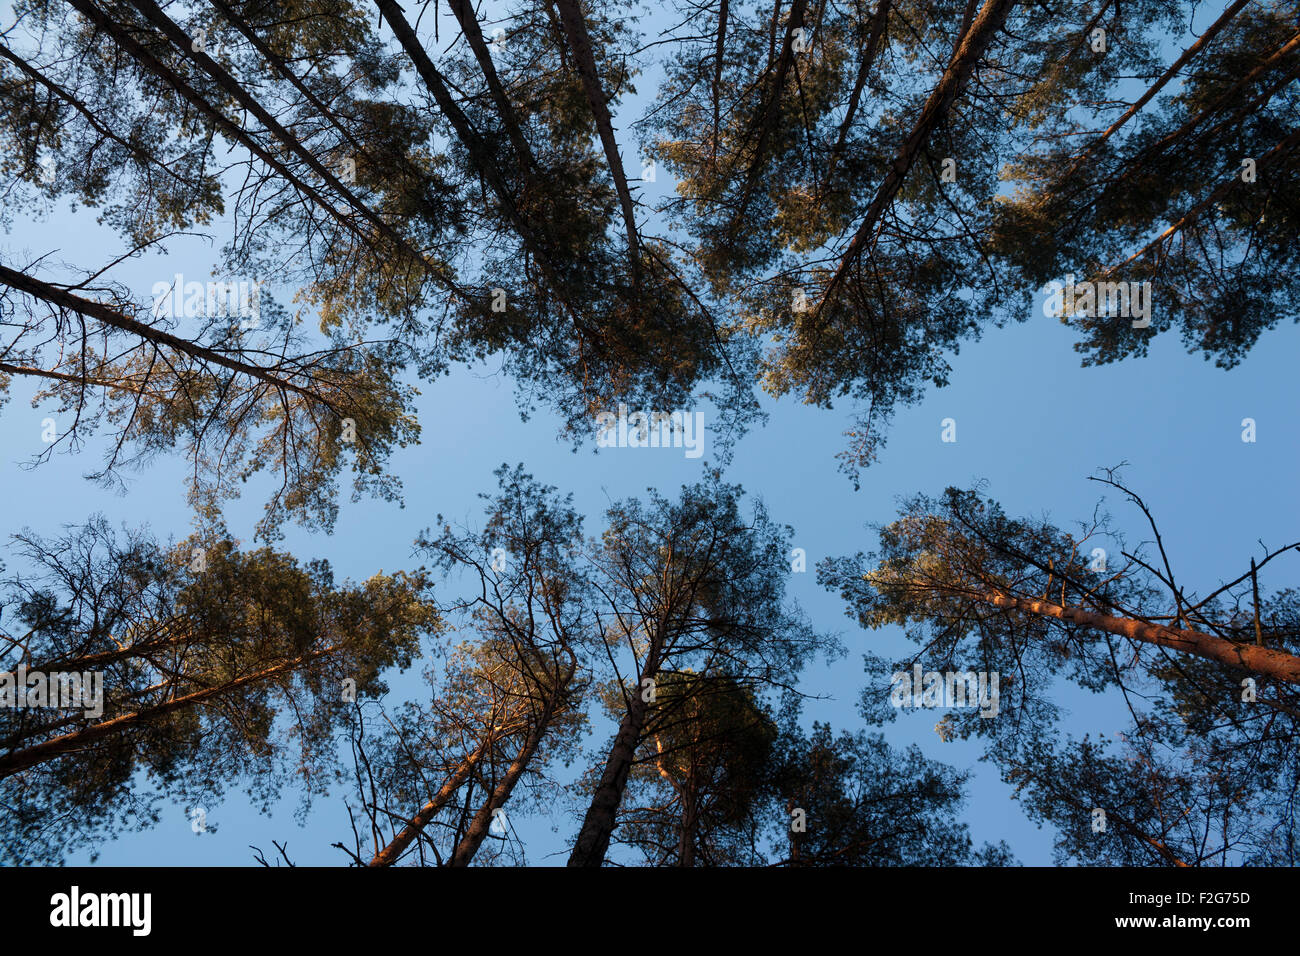 Opening of blue sky between pine trees branches in Lithuania forest Stock Photo